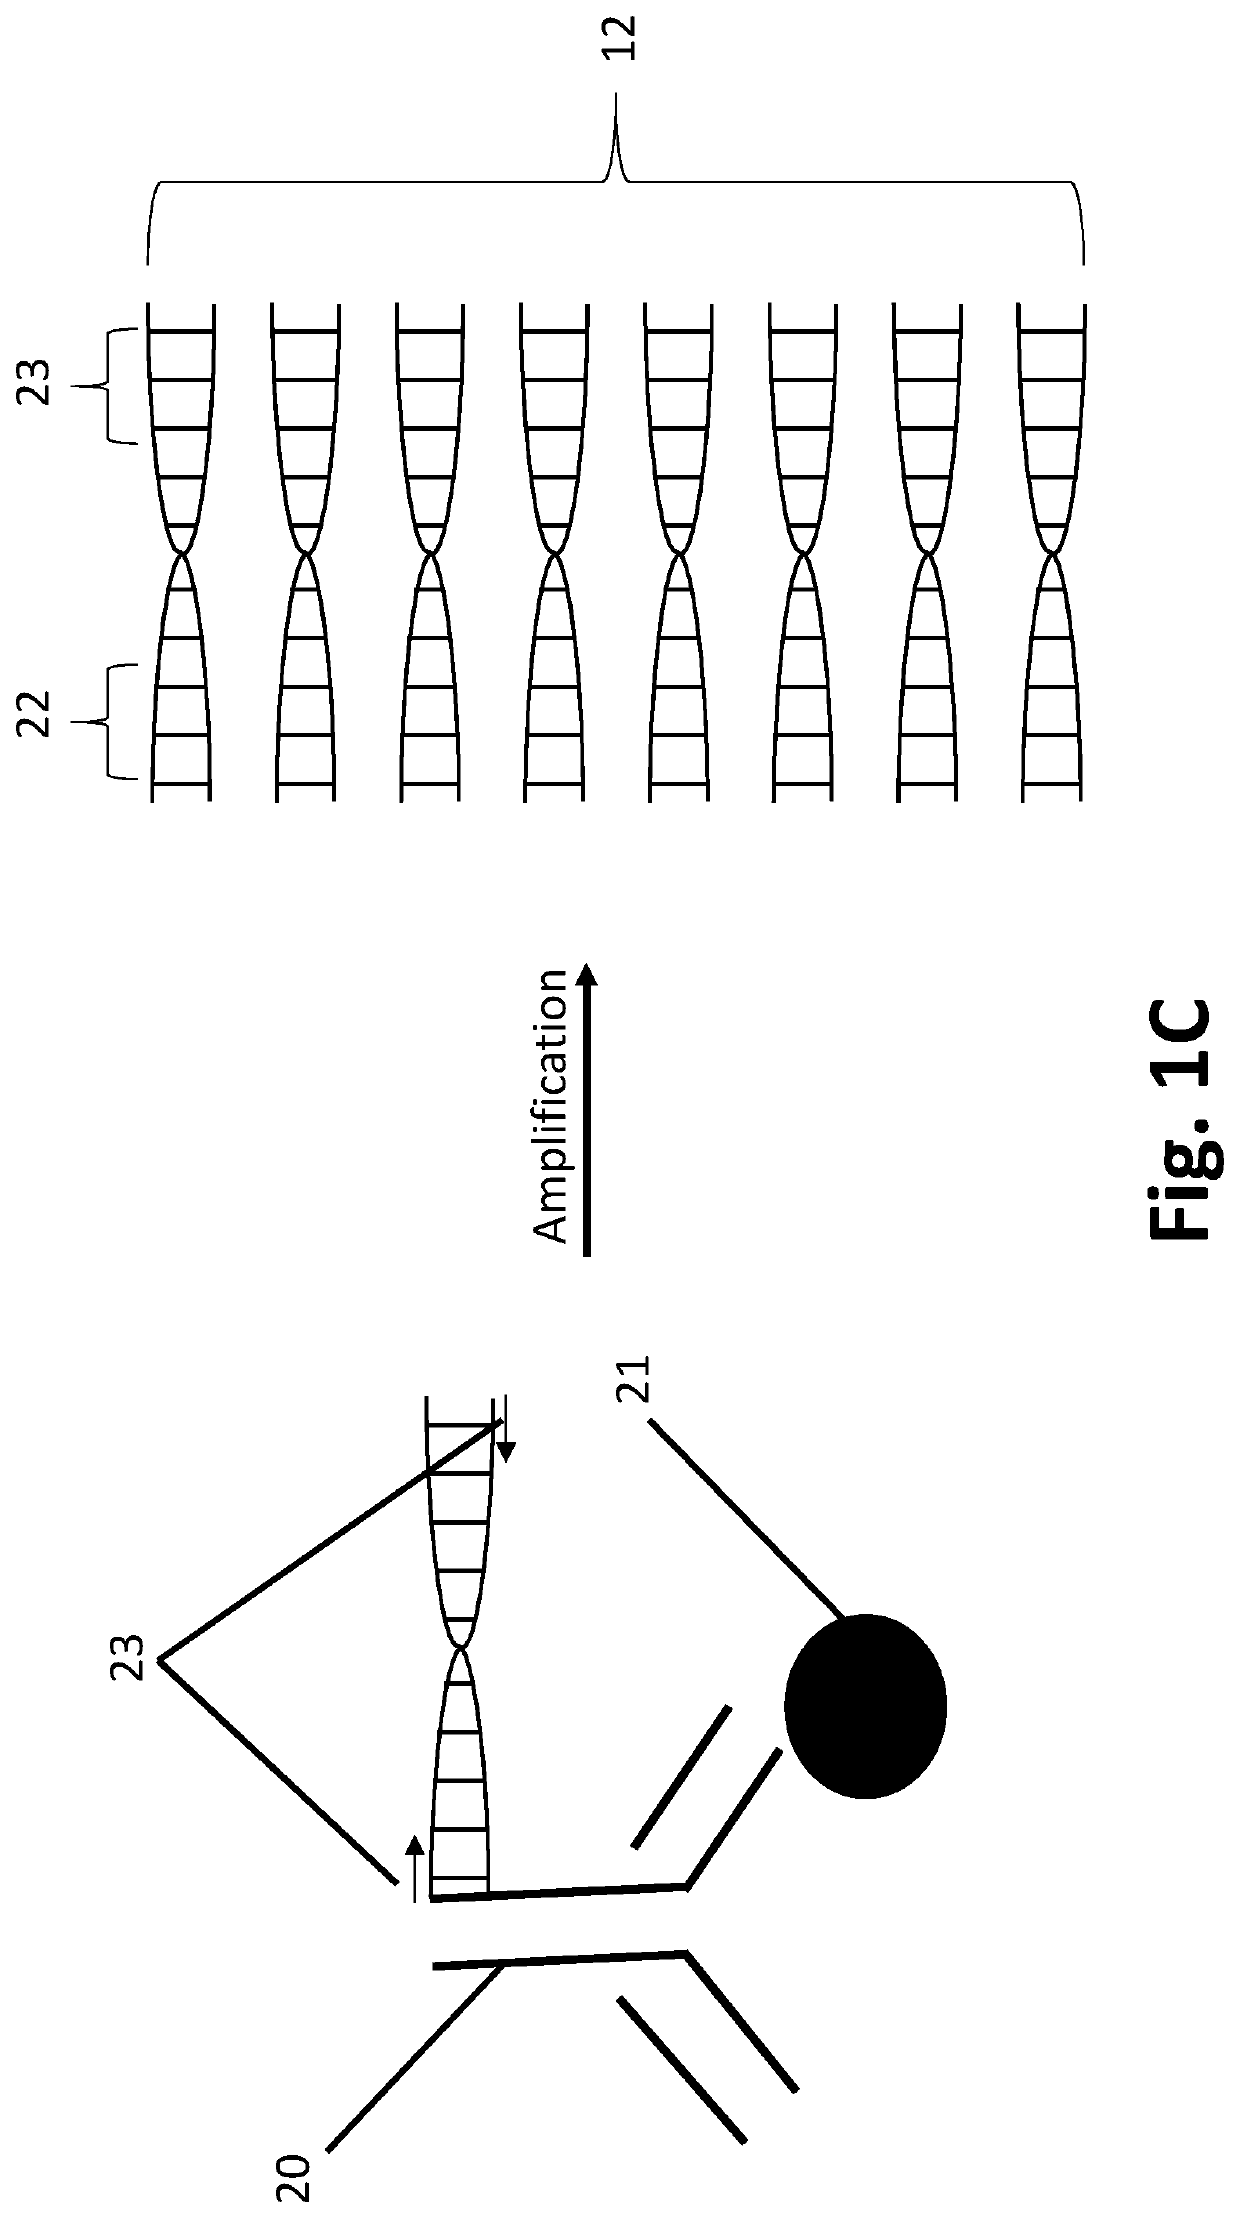 Antibody or aptamer conjugated-polynucleotides and detection methods and microfluidics devices using the same